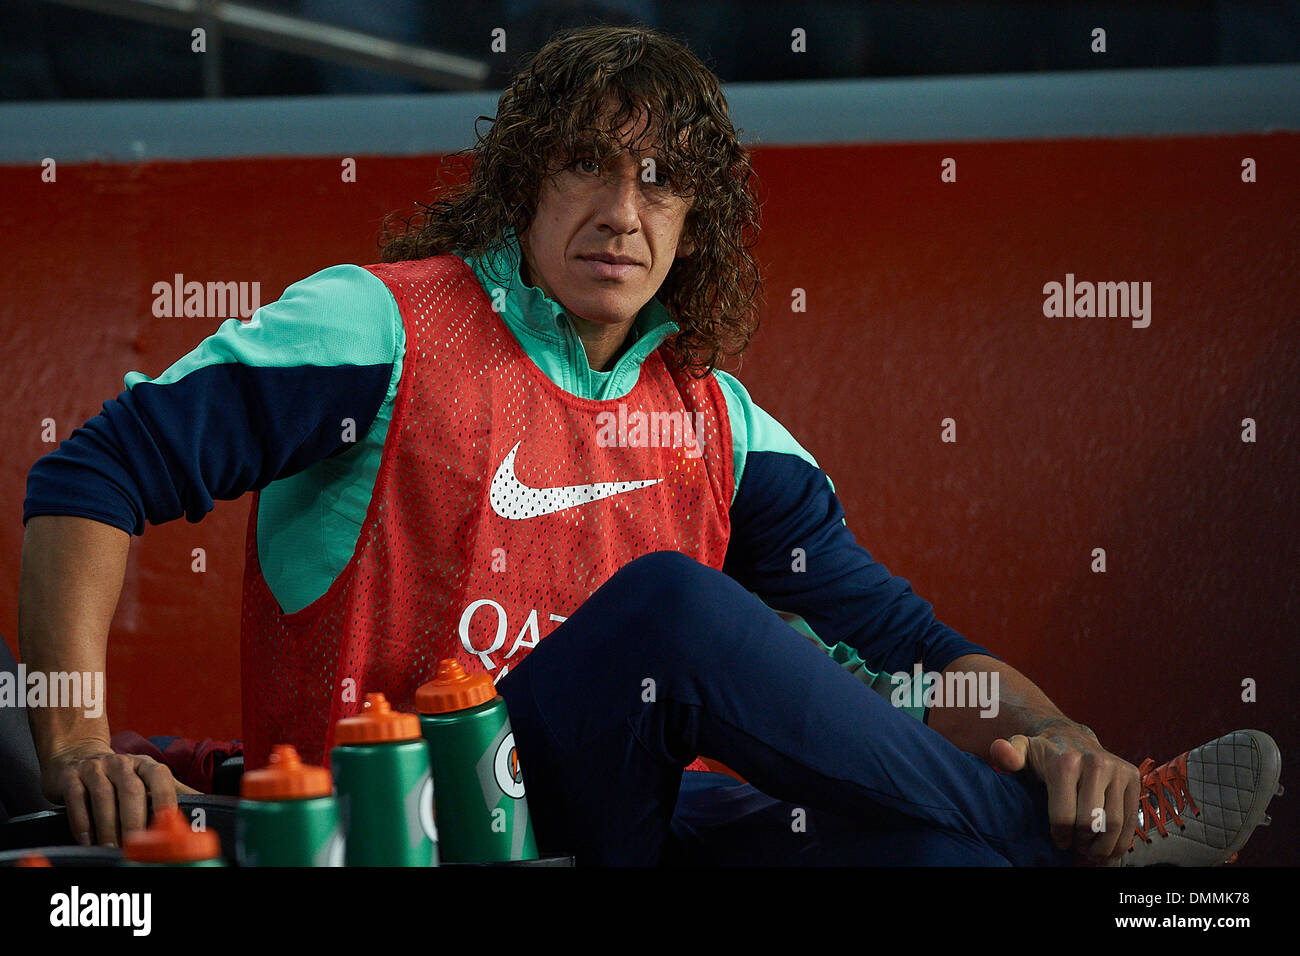 Barcelona, Spain. 14th December 2013. Carles Puyol (FC Barcelona) has been see prior La Liga soccer match between FC Barcelona and Villarreal CF, at the Camp Nou stadium in Barcelona, Spain, Saturday, December 14, 2013. Foto: S.Lau Credit:  dpa picture alliance/Alamy Live News Stock Photo